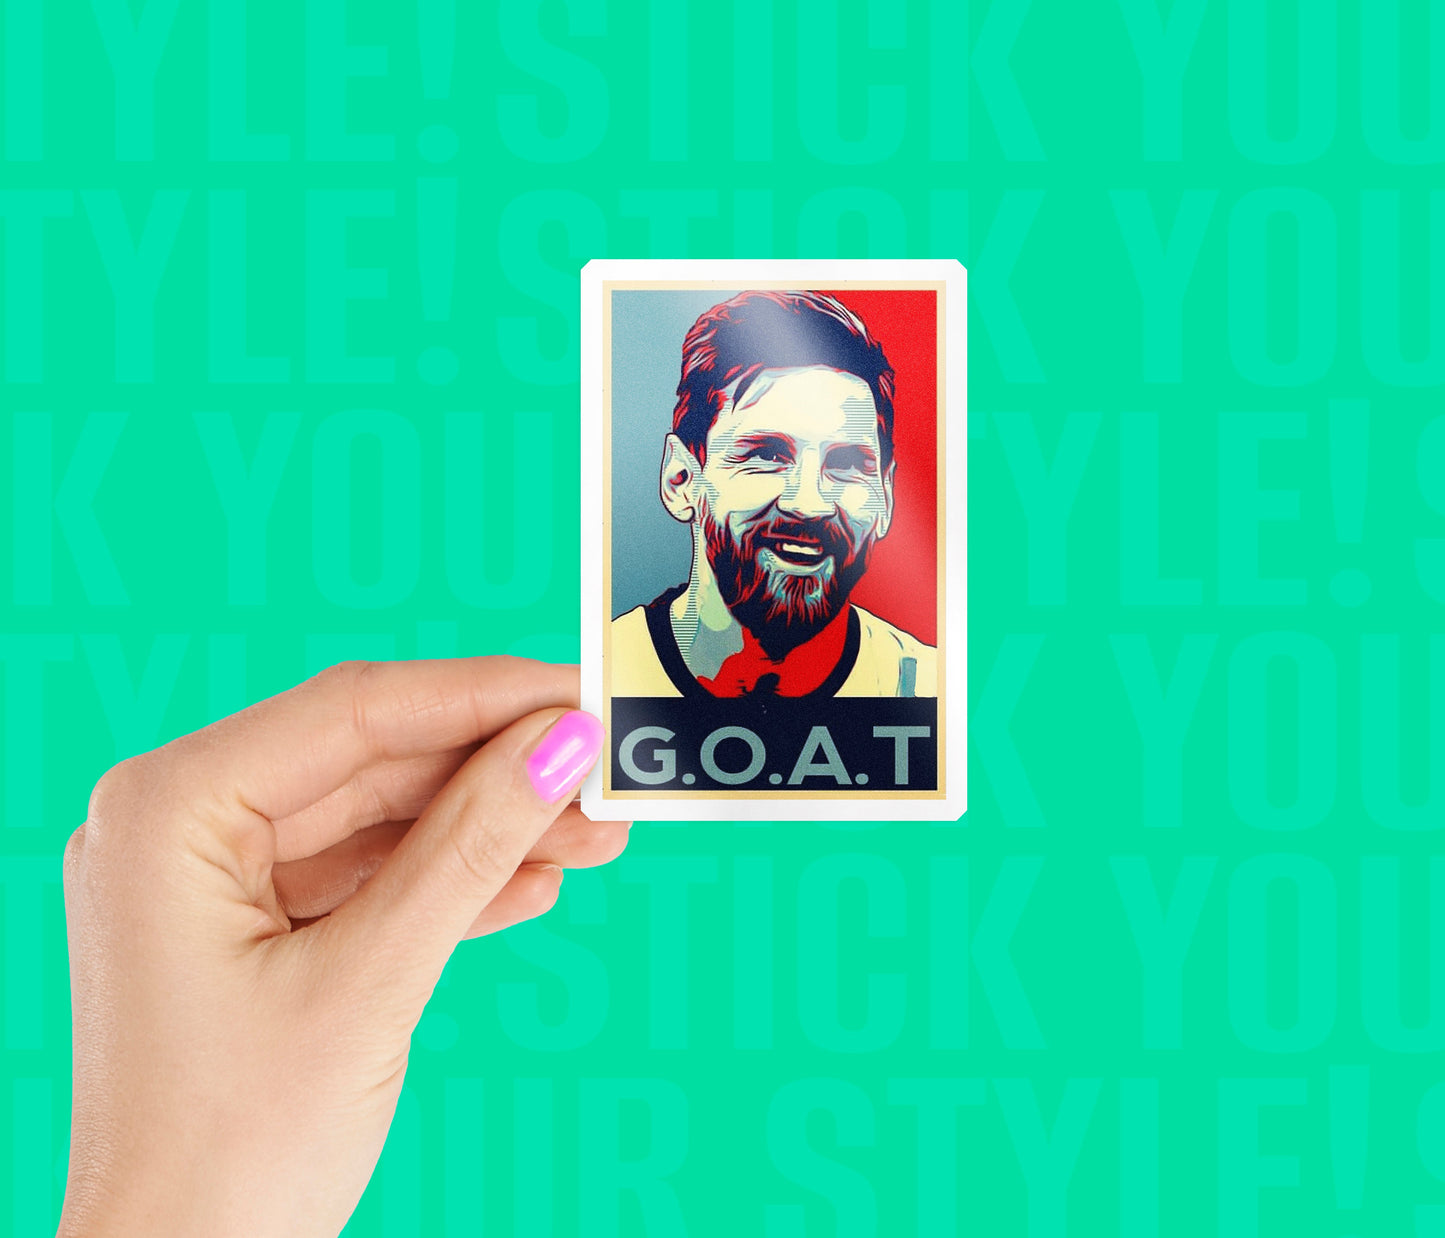 Messi - The Goat Poster Magnetic Sticker